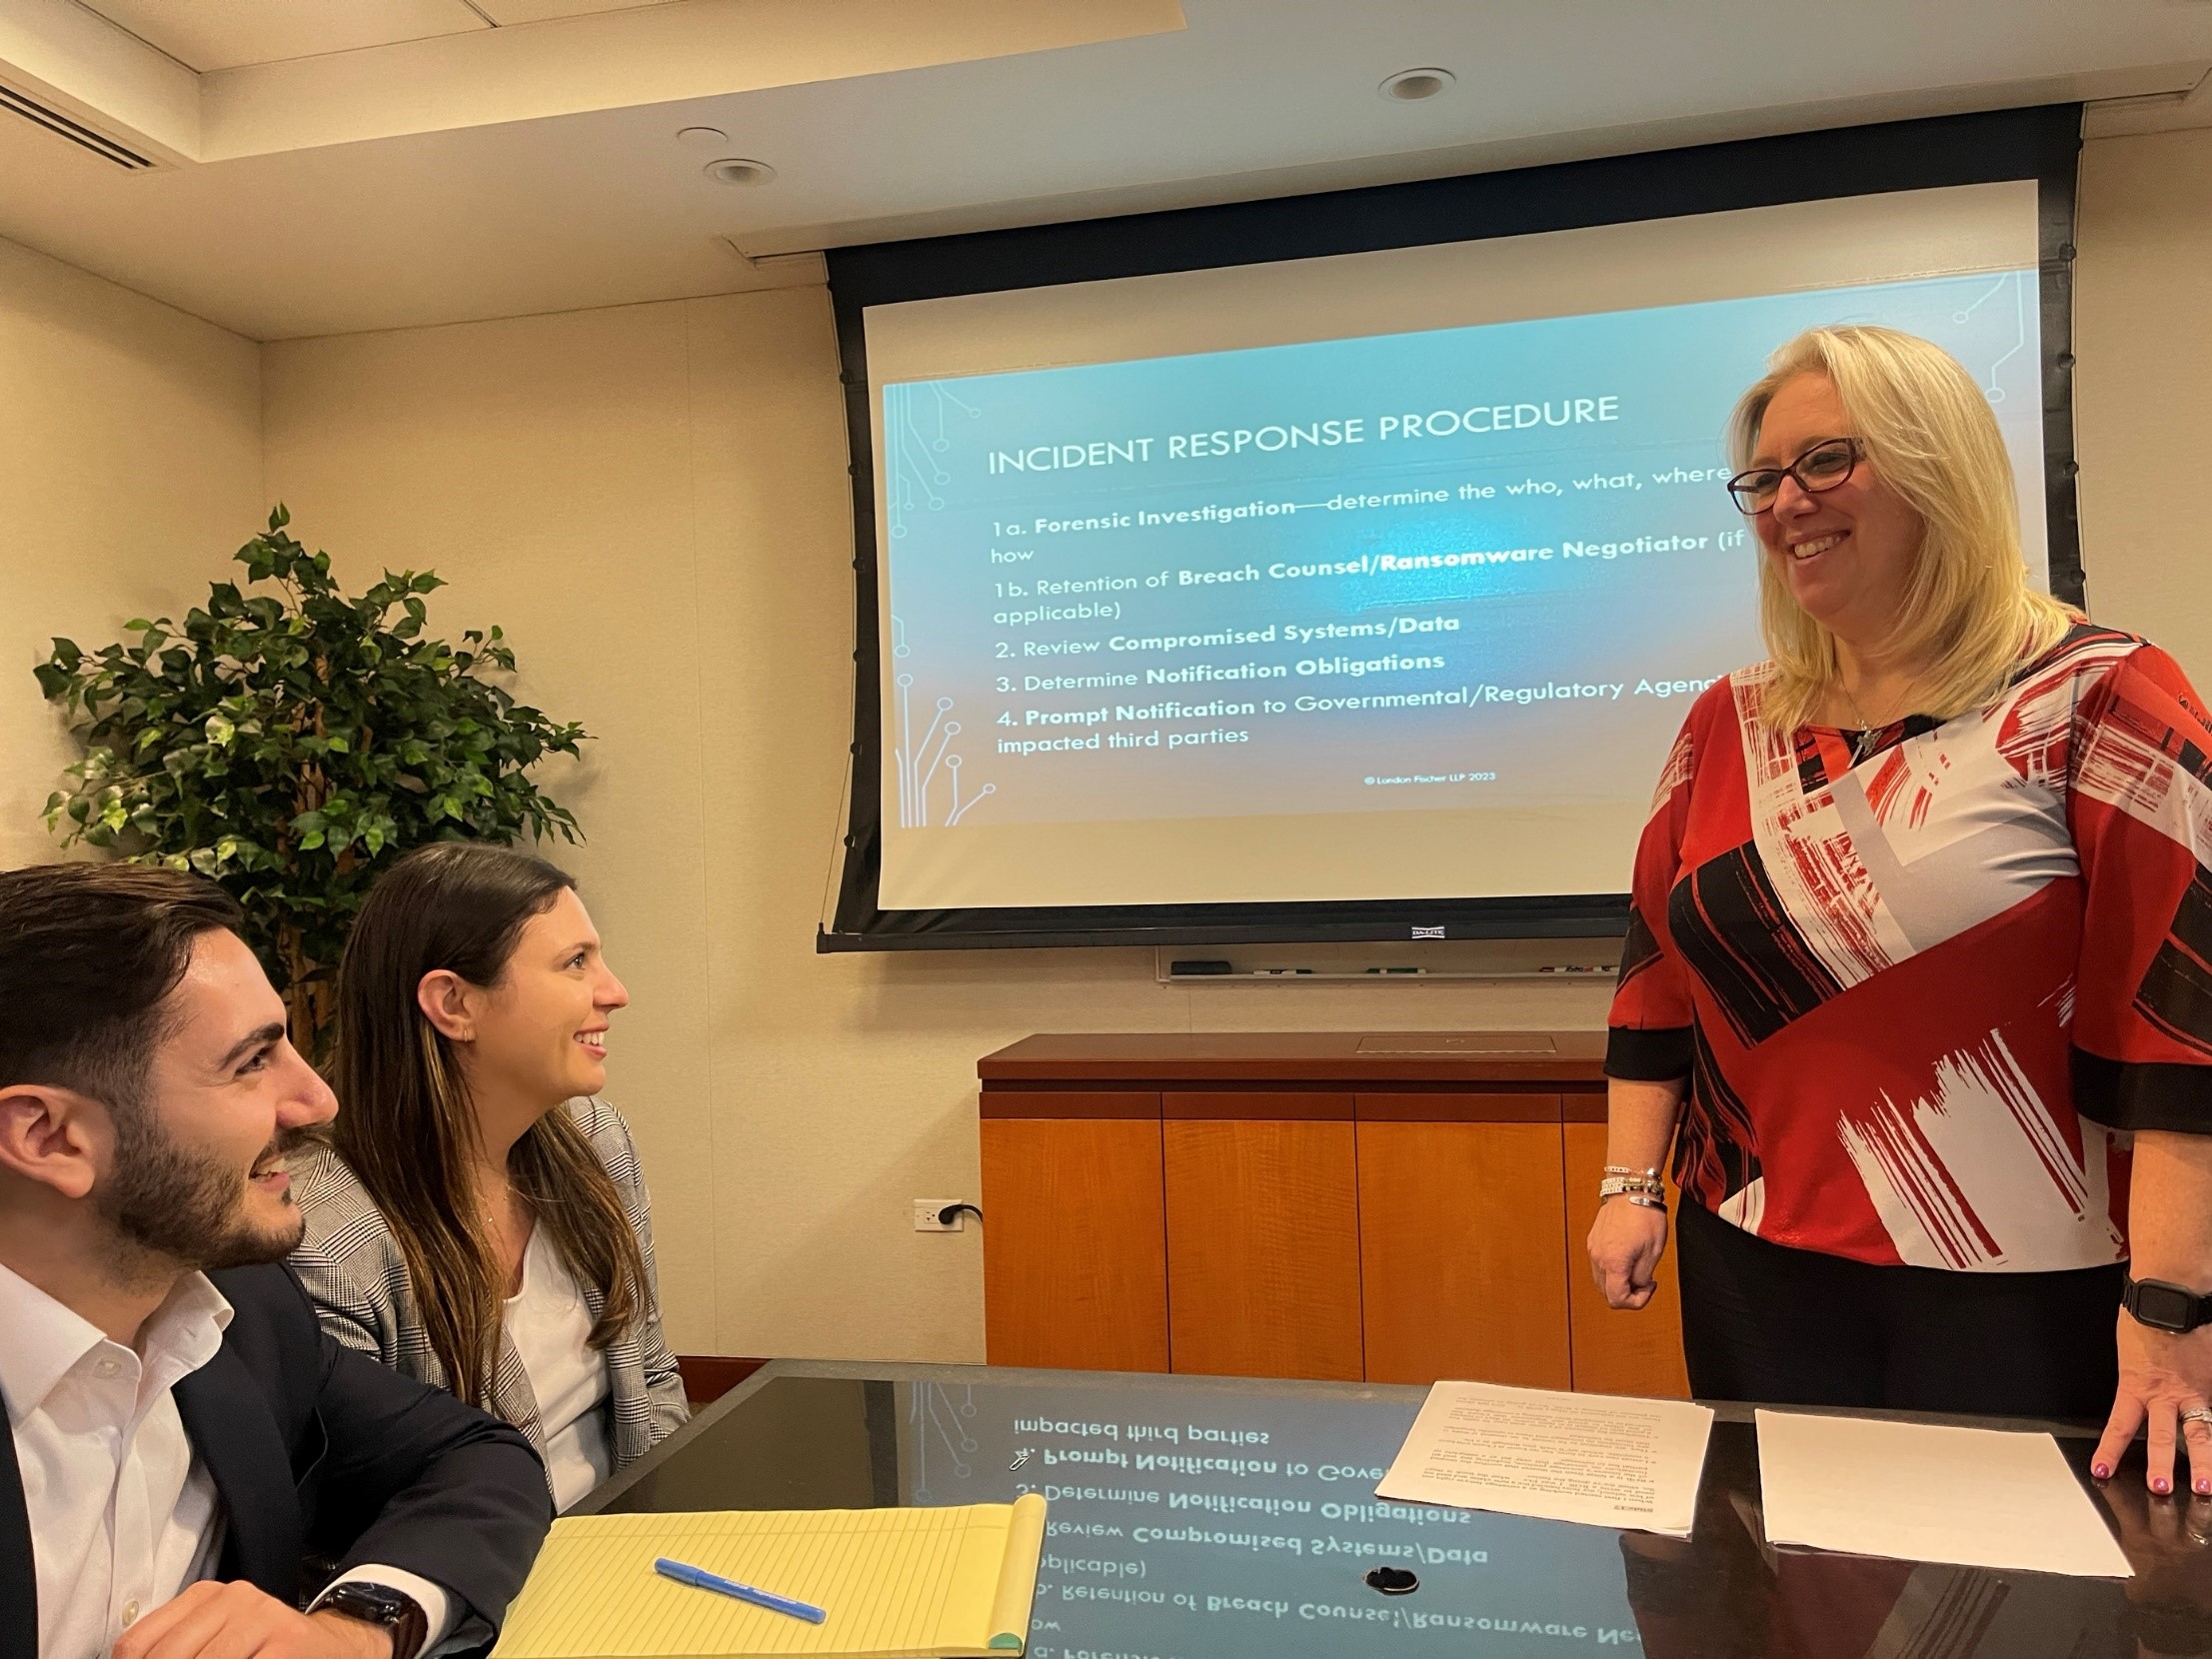 Wendy Keenan (NY & NJ), Jennifer Russnow (NY), and Matthew Goldman (NY) conducted a presentation on first- and third-party cybersecurity insurance for more than 20 claim executives at a prominent international insurance company.